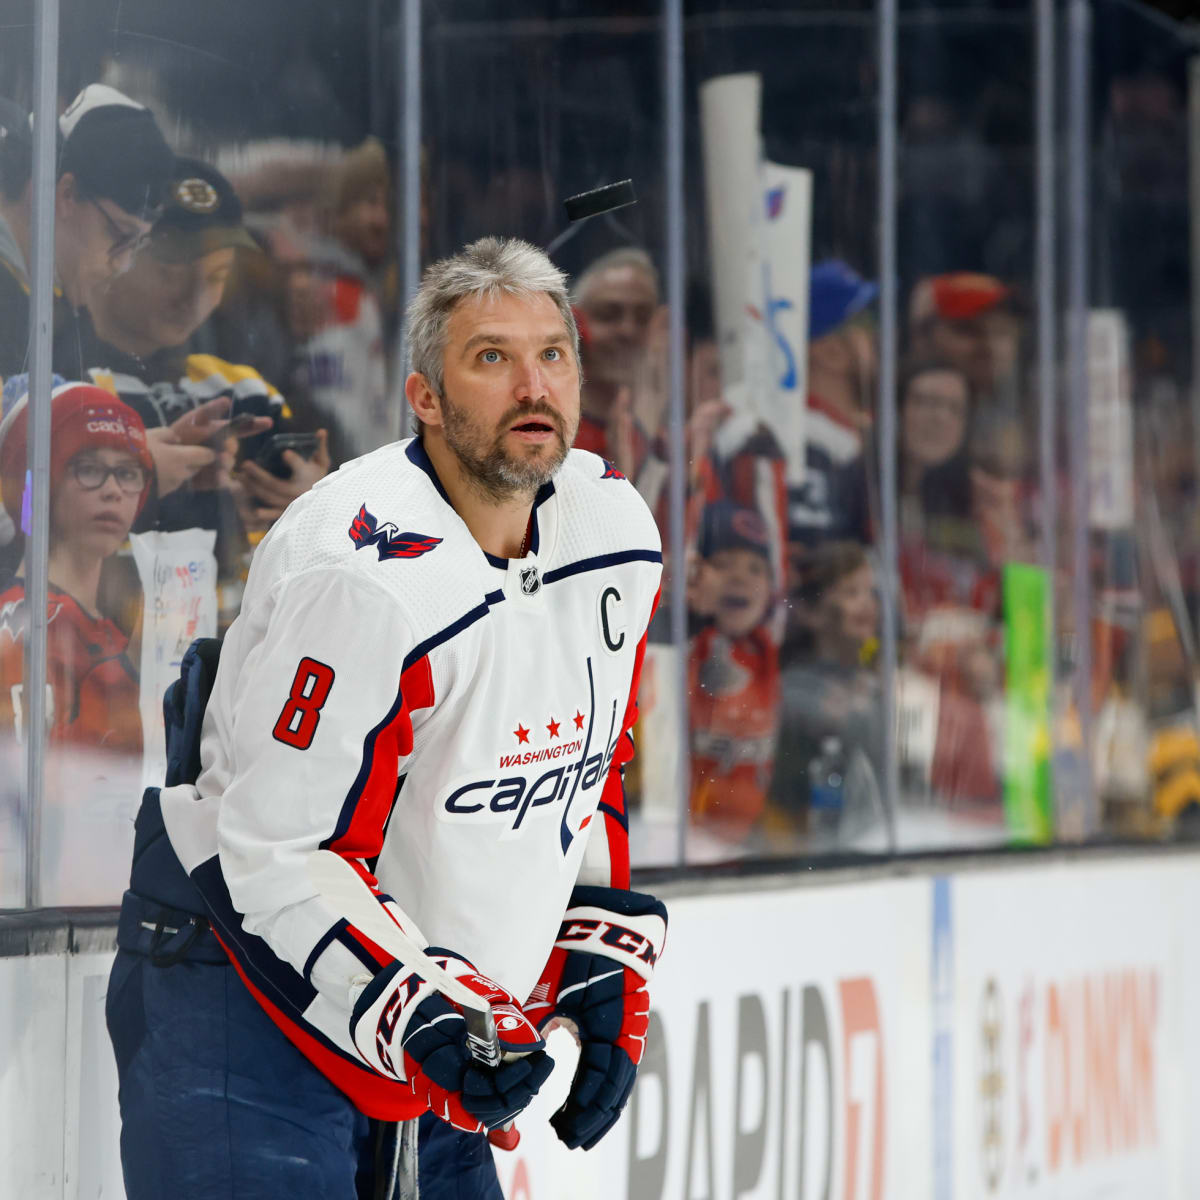 Alex Ovechkin says his father died, will be away from Capitals